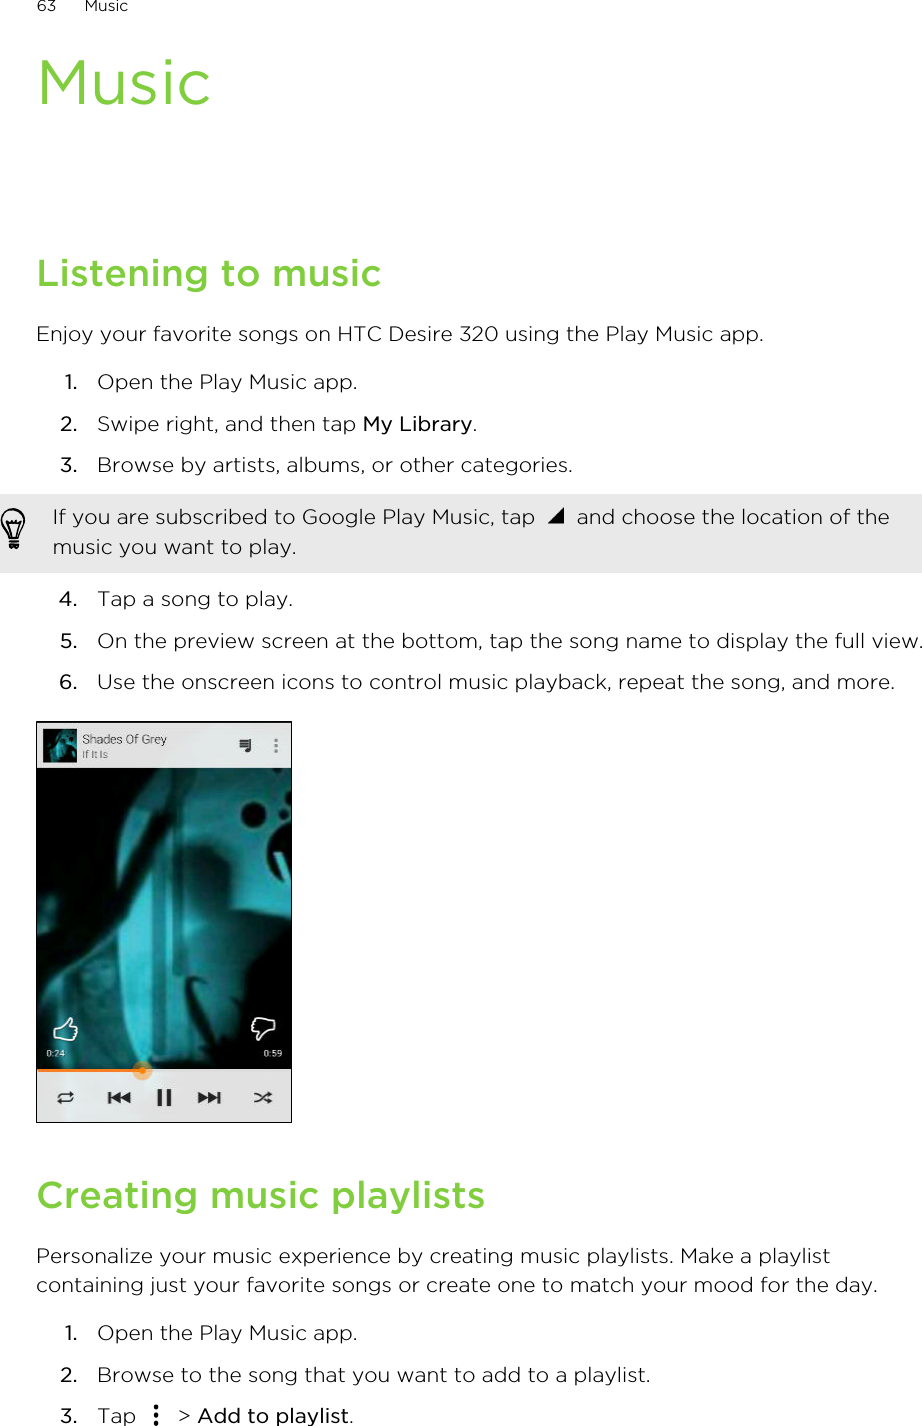 MusicListening to musicEnjoy your favorite songs on HTC Desire 320 using the Play Music app.1. Open the Play Music app.2. Swipe right, and then tap My Library.3. Browse by artists, albums, or other categories. If you are subscribed to Google Play Music, tap   and choose the location of themusic you want to play.4. Tap a song to play.5. On the preview screen at the bottom, tap the song name to display the full view.6. Use the onscreen icons to control music playback, repeat the song, and more.Creating music playlistsPersonalize your music experience by creating music playlists. Make a playlistcontaining just your favorite songs or create one to match your mood for the day.1. Open the Play Music app.2. Browse to the song that you want to add to a playlist.3. Tap   &gt; Add to playlist.63 Music